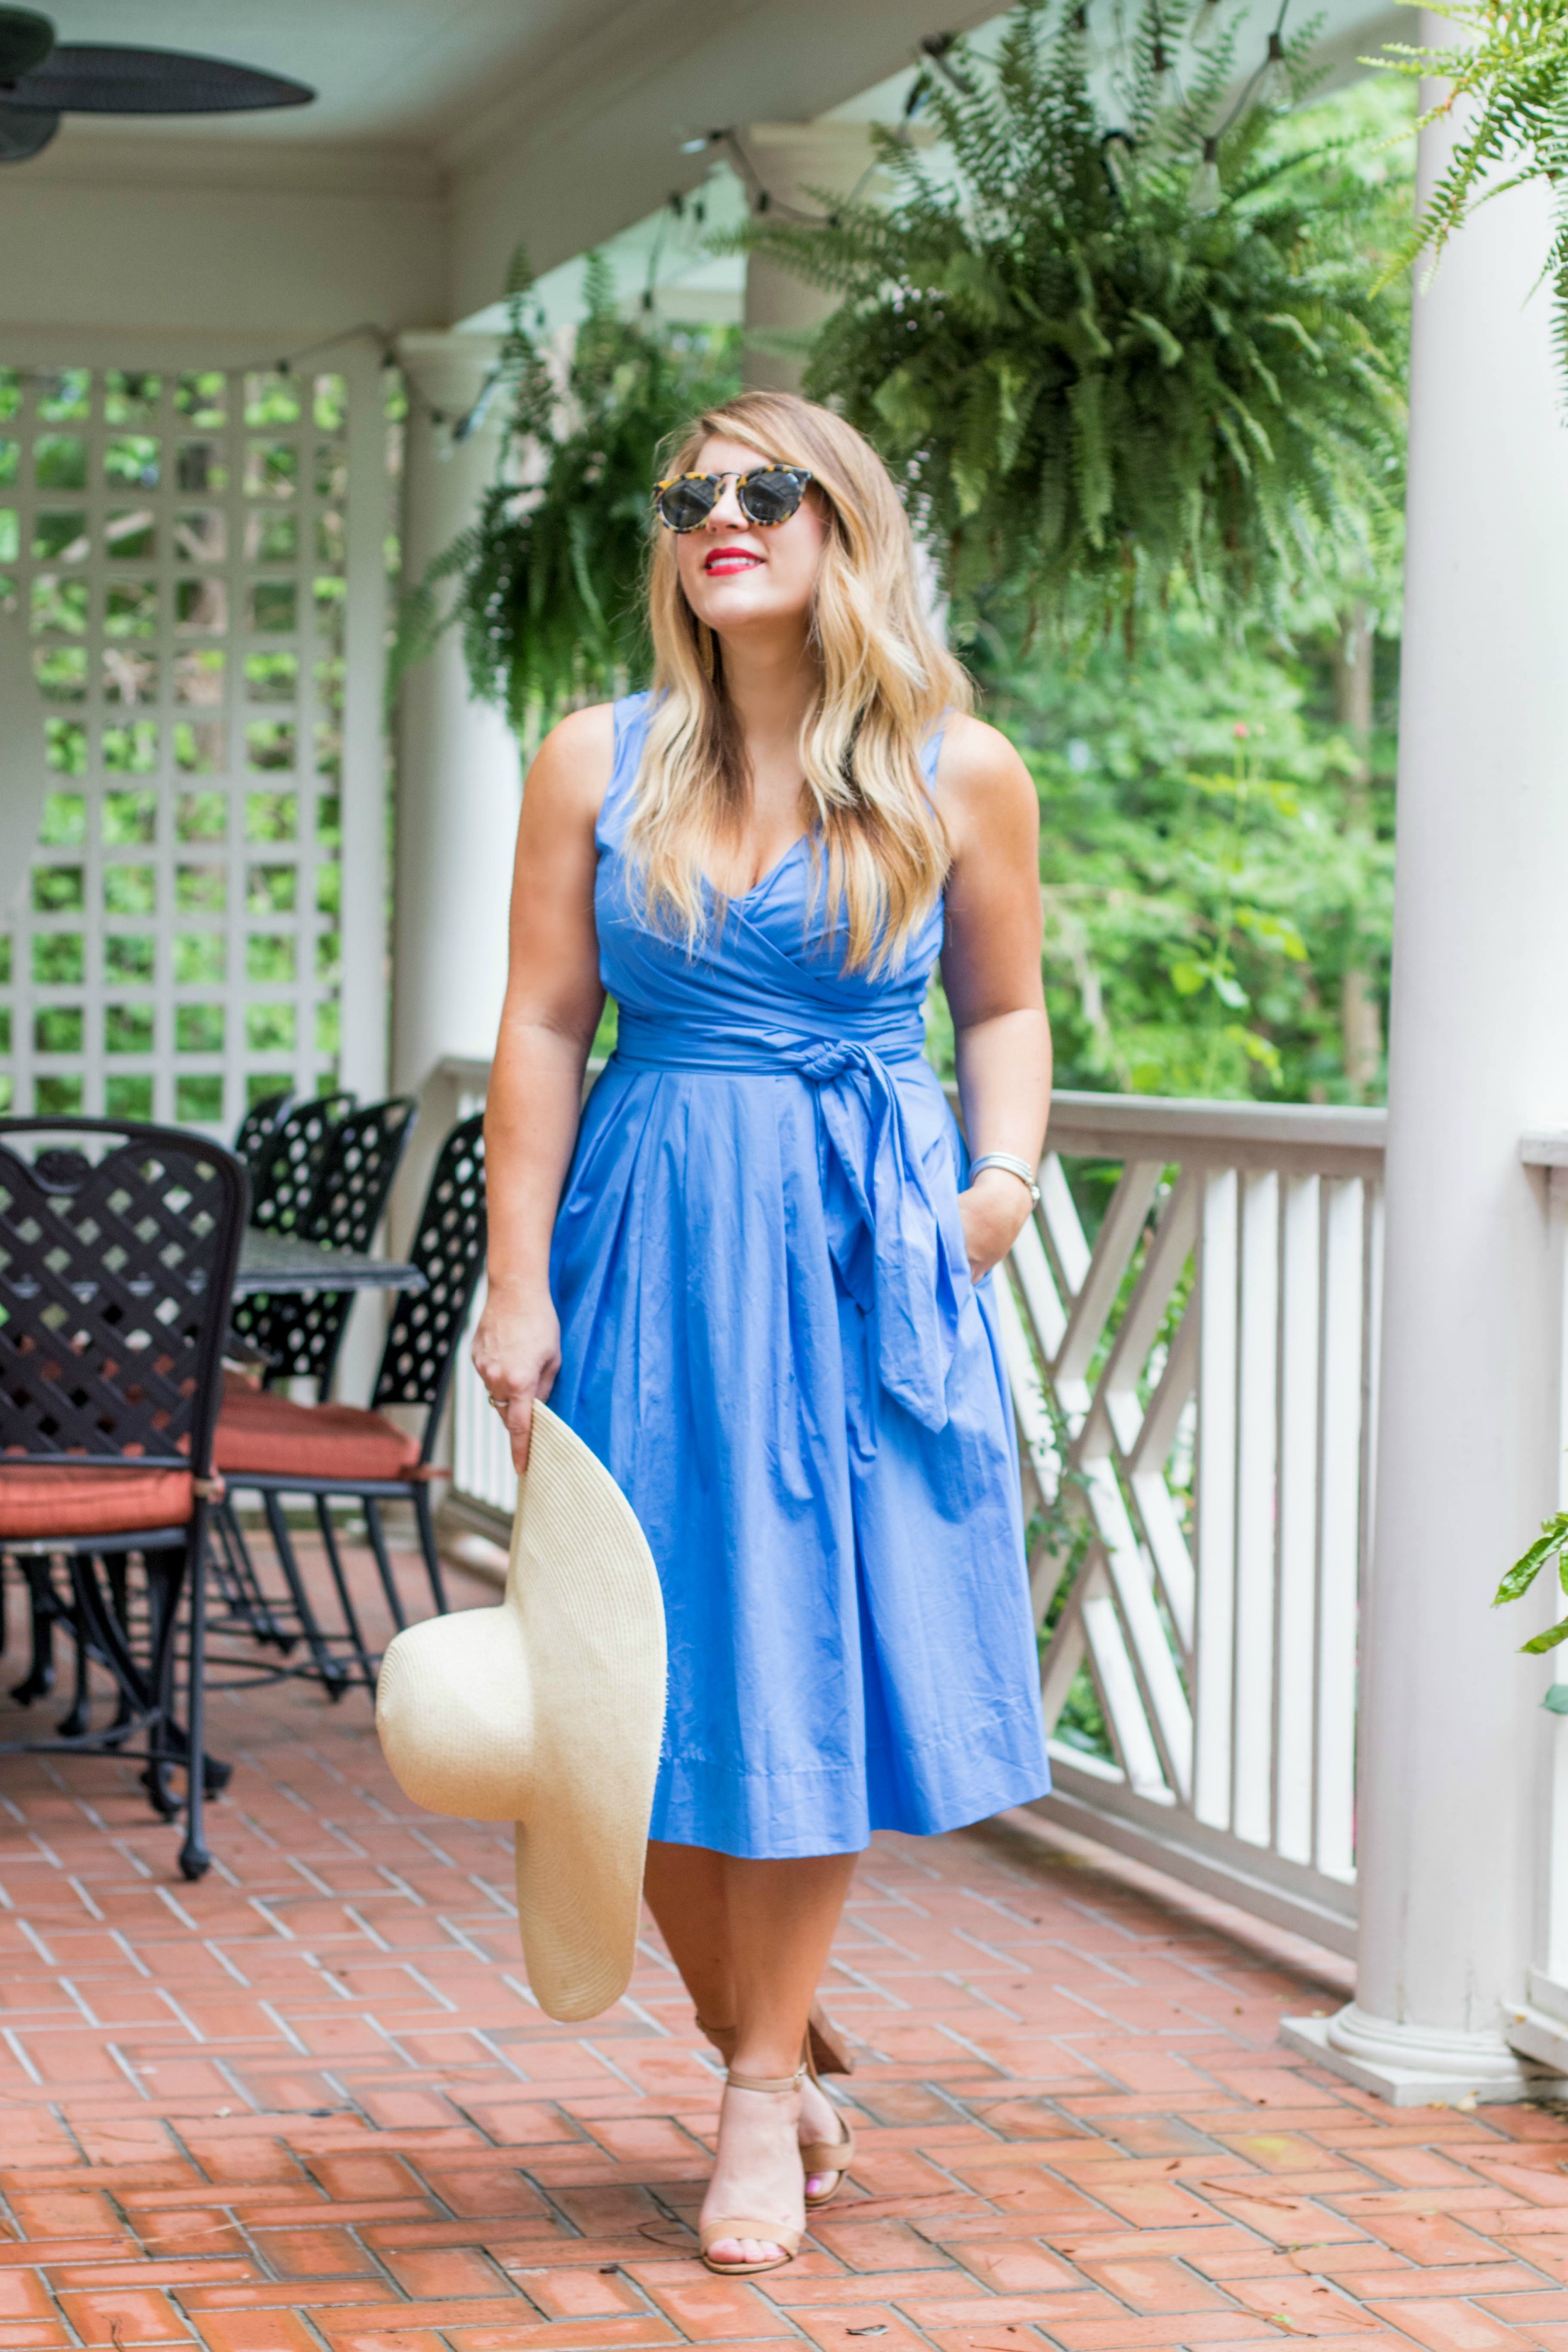 What to wear to a summer wedding